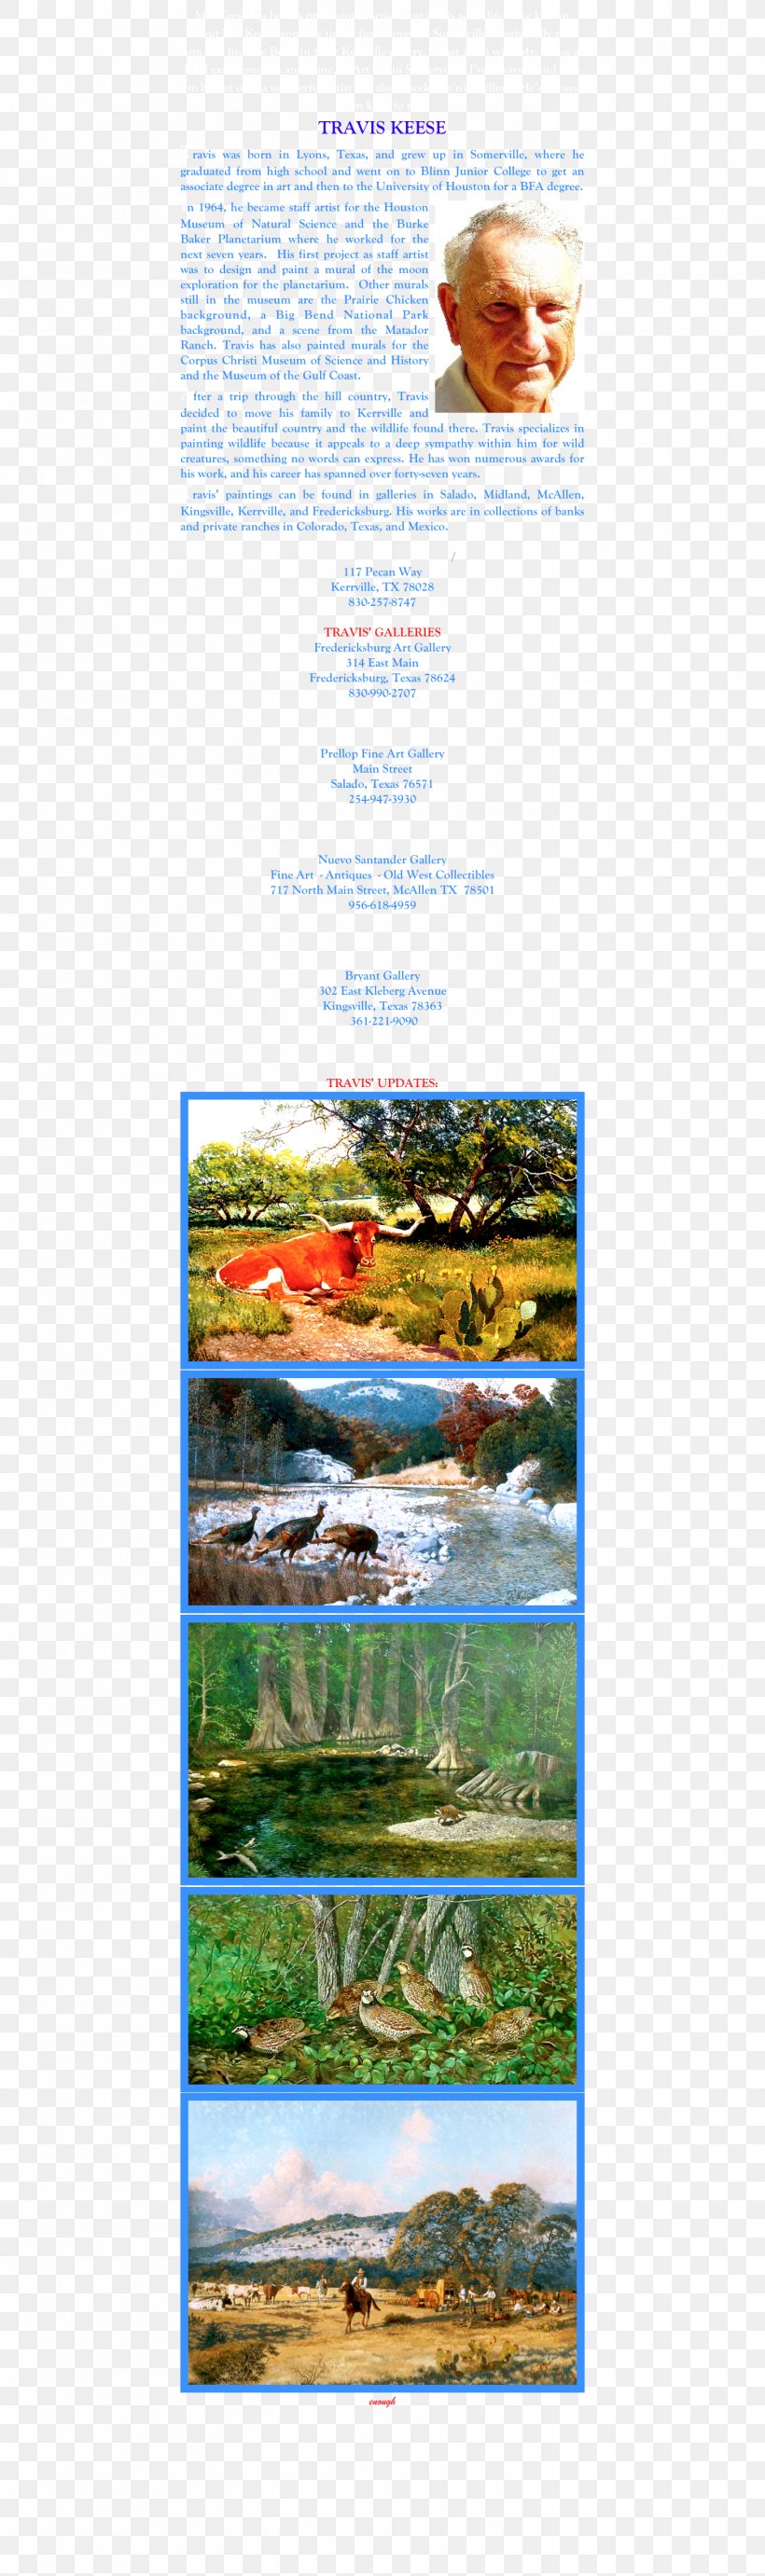 Water Resources Line Organism, PNG, 1463x4931px, Water Resources, Advertising, Brochure, Organism, Text Download Free